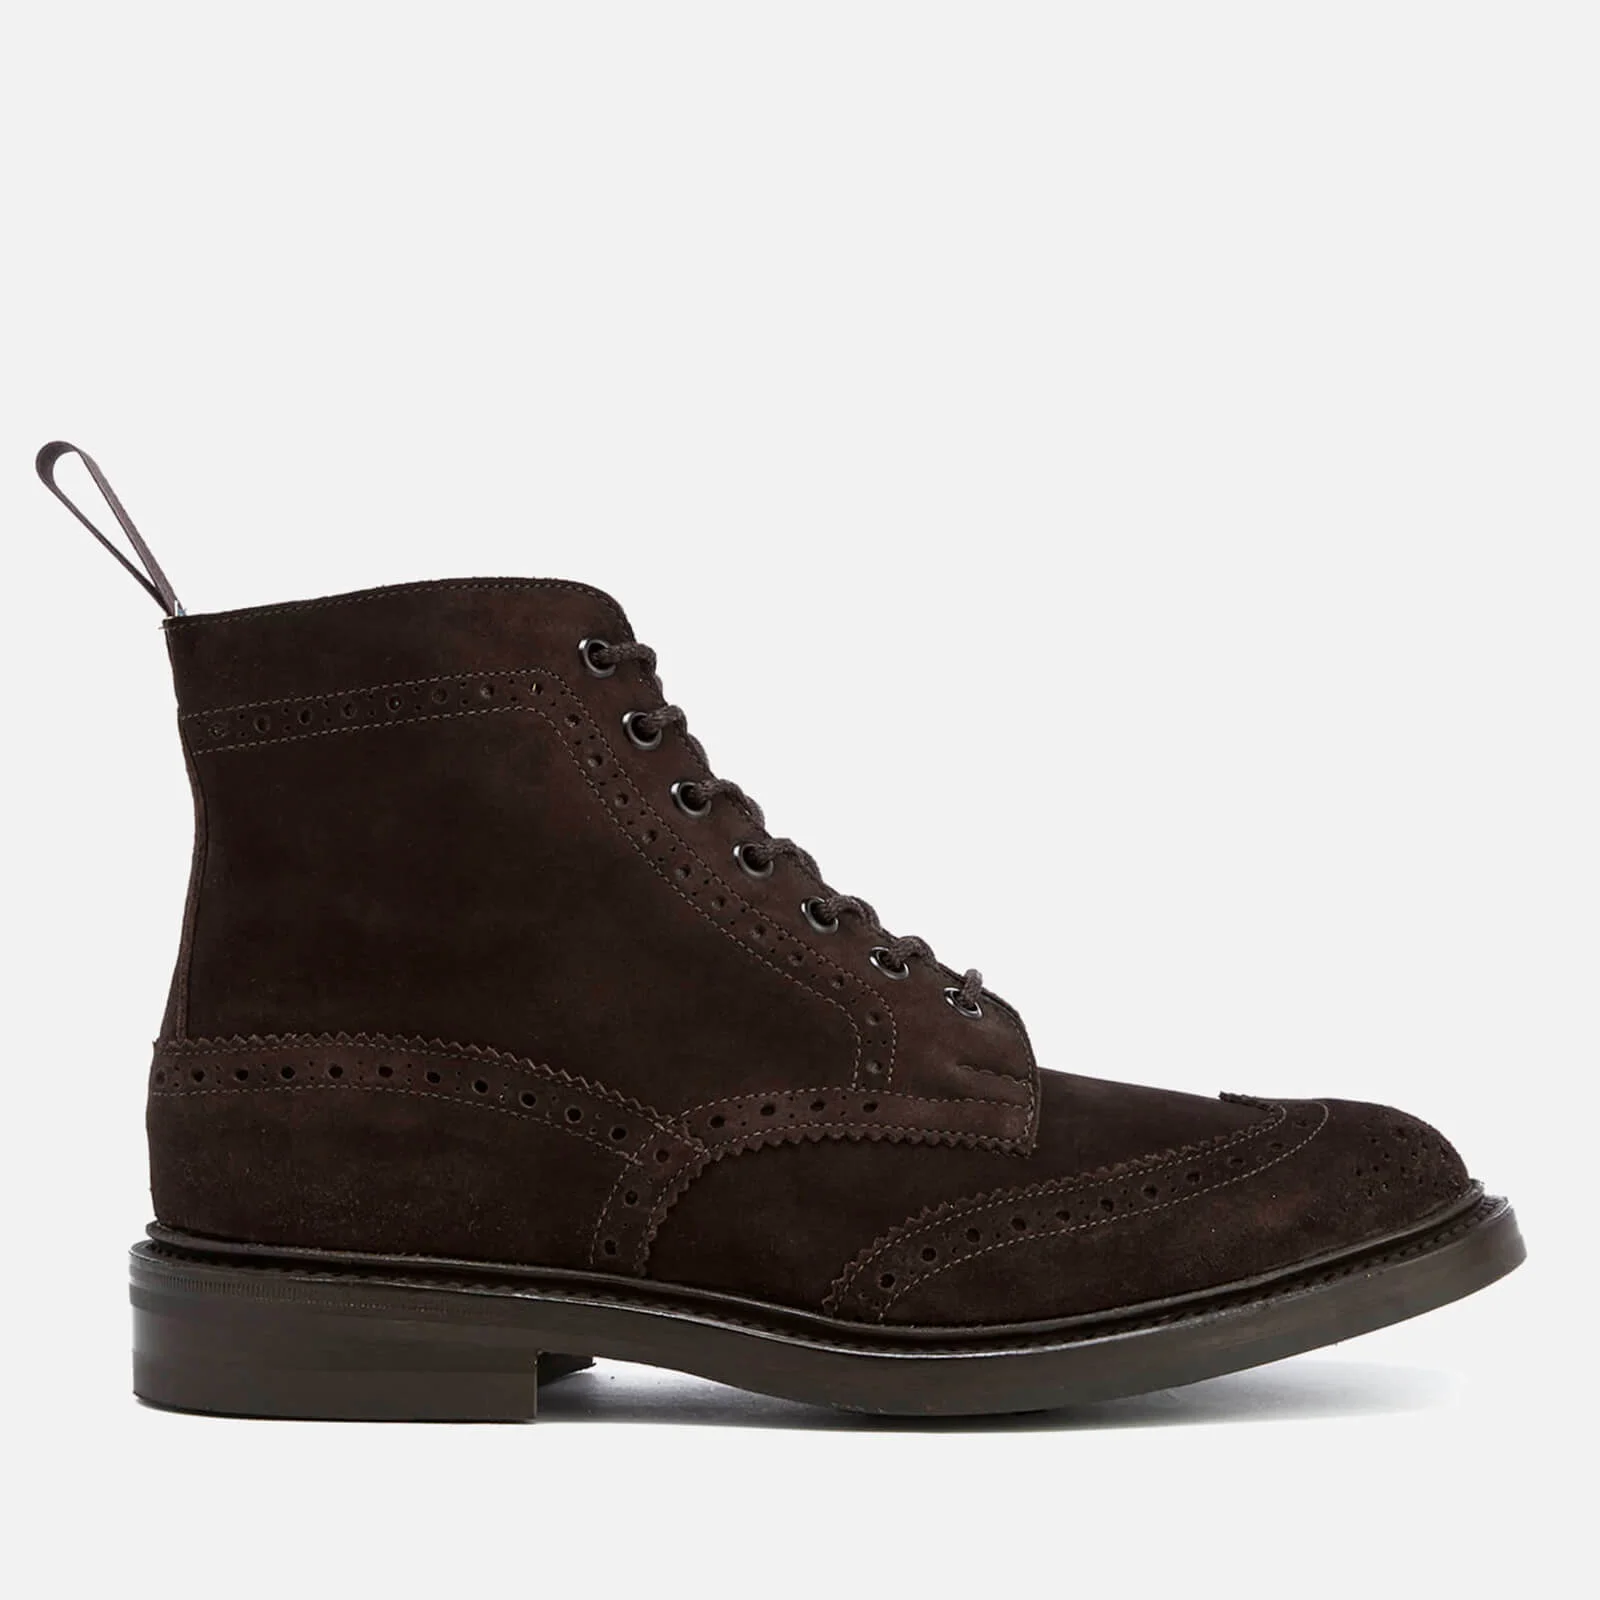 Knutsford by Tricker's Men's Stow Suede Lace Up Boots - Coffee Image 1